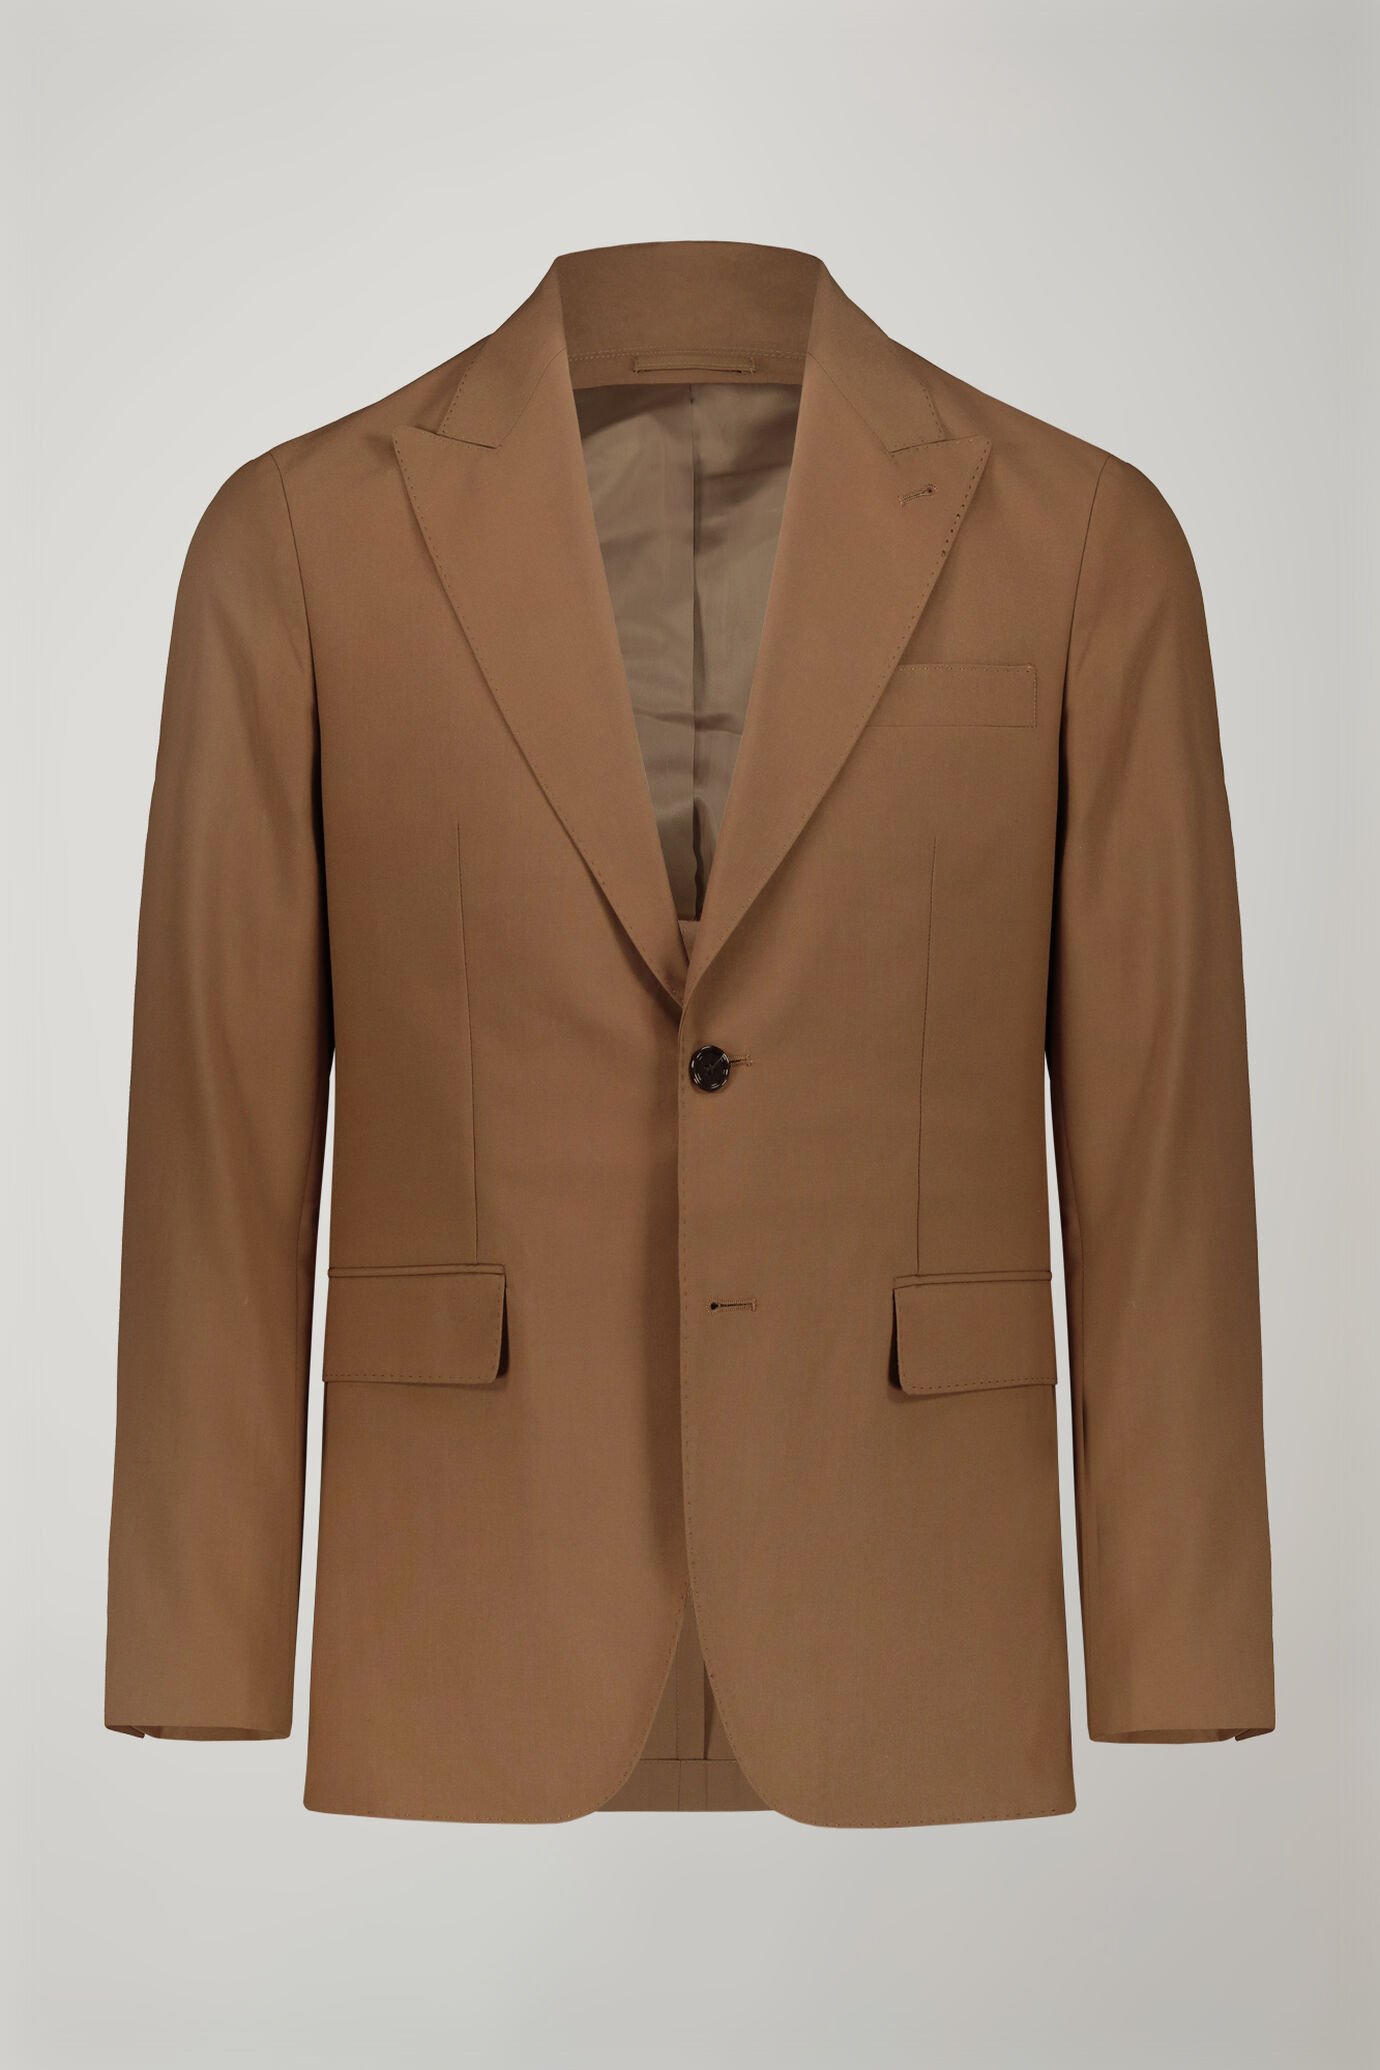 Men's single-breasted suit with peaked lapels regular fit fabric image number 4